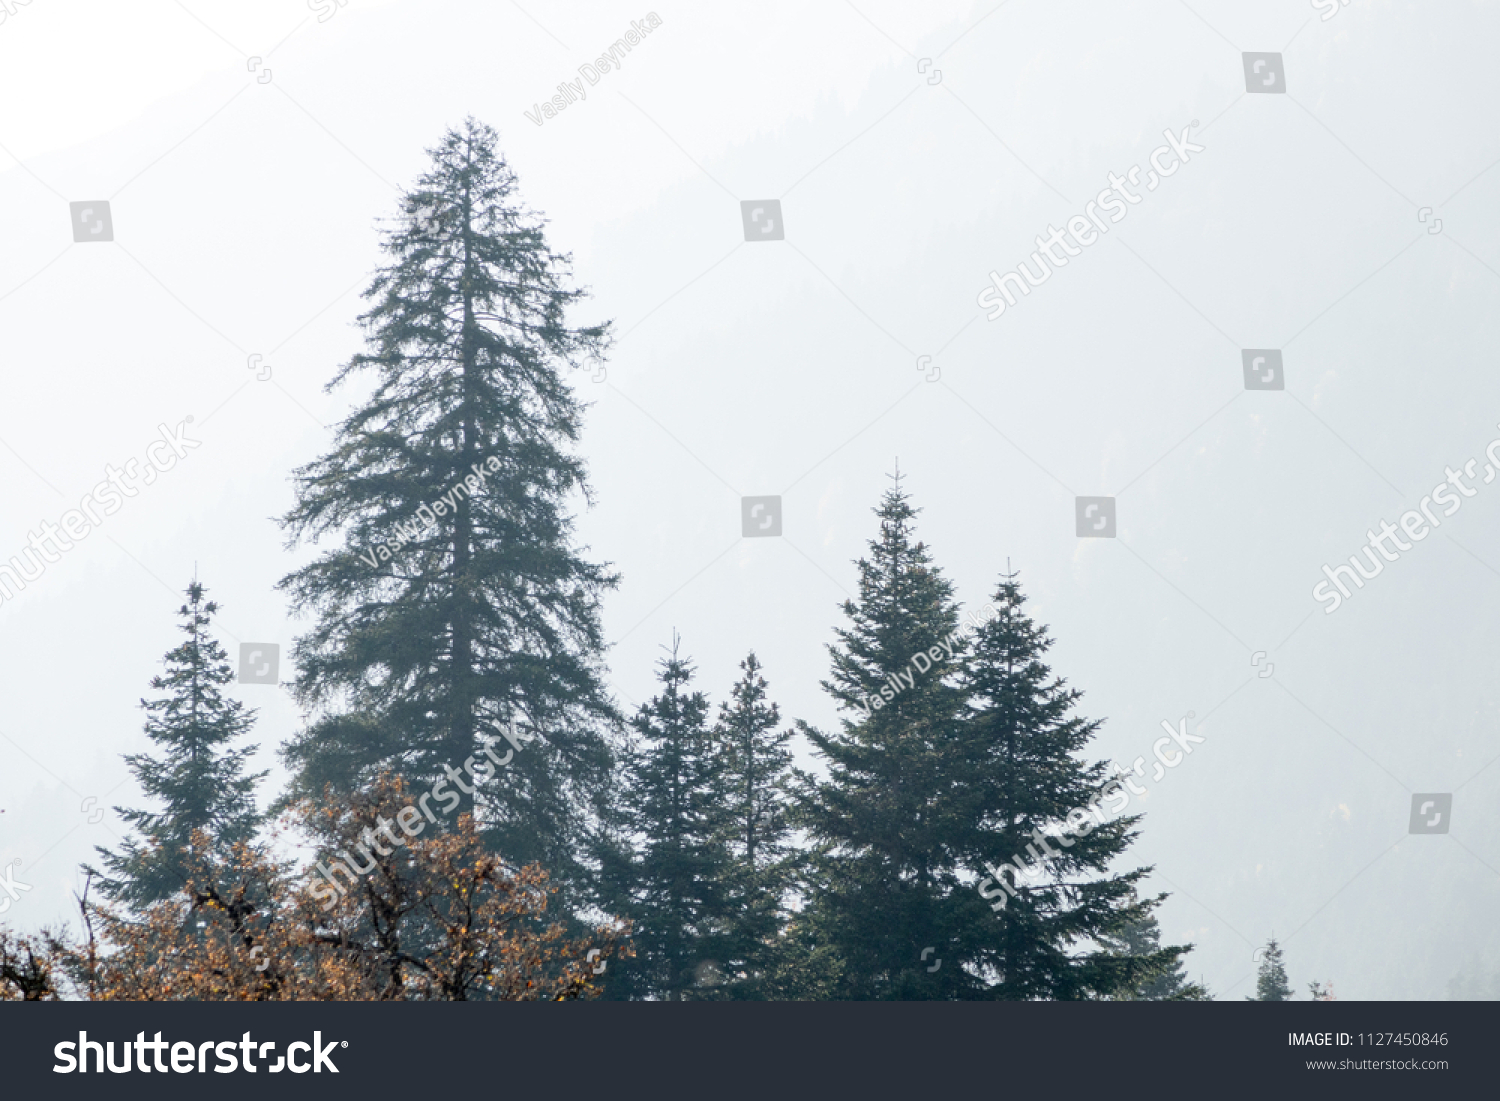 Beautiful tops of fir trees in the mountains. Autumn, leaves. Beautiful scenery #1127450846